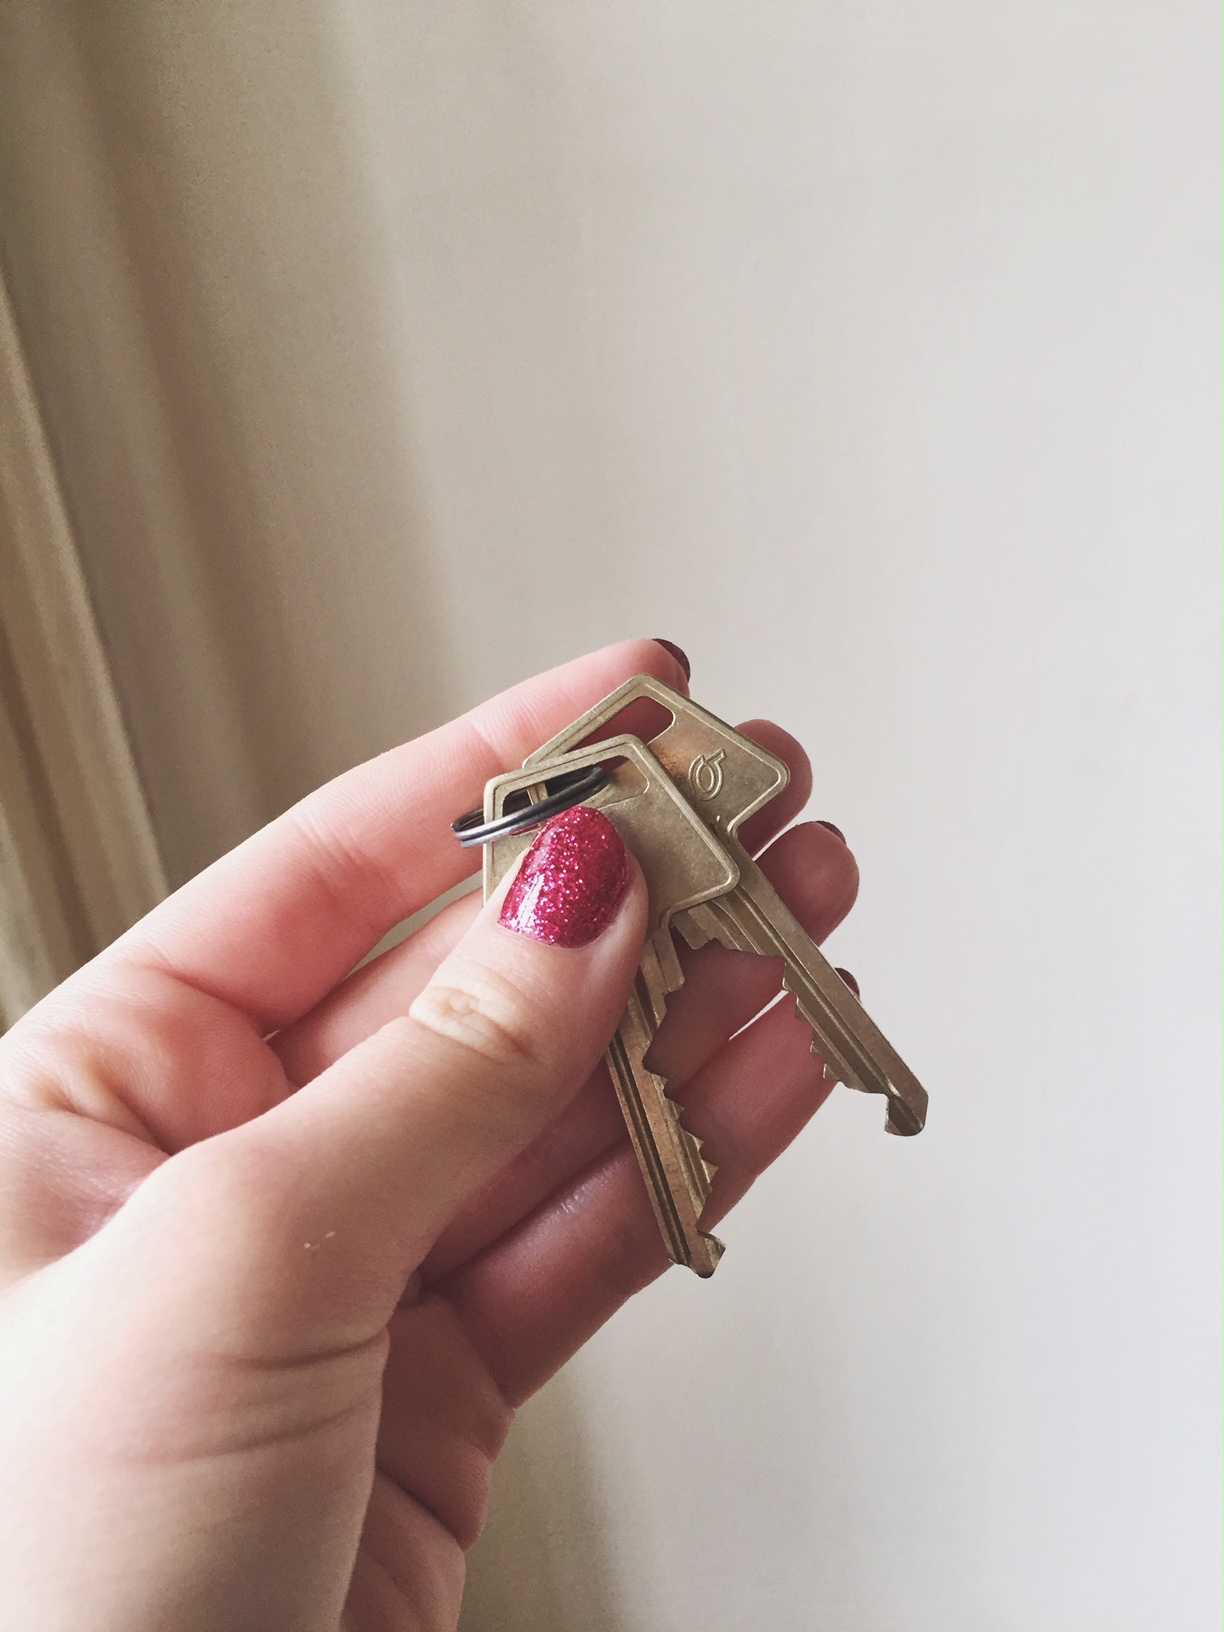 Keys for my new apartment